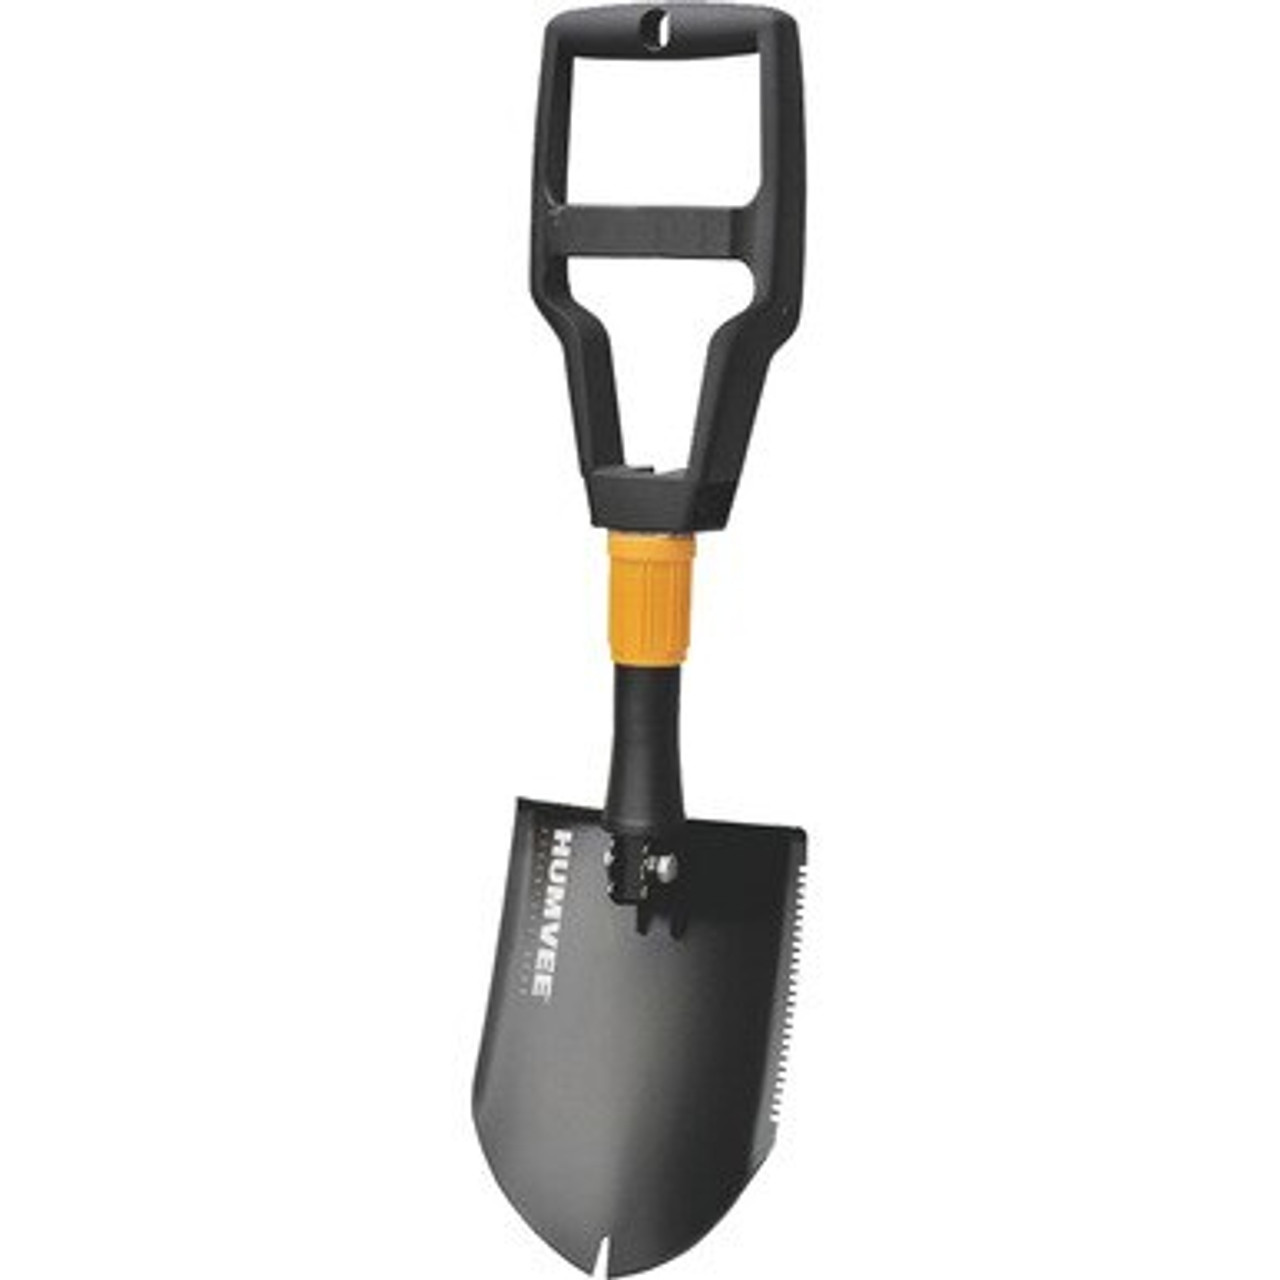 https://cdn11.bigcommerce.com/s-ovptlwt64t/images/stencil/1280x1280/products/517/2037/HUMVEE-Folding-Shovel-with-Nail-Puller-and-Saw-Black-1__29555.1594399402.jpg?c=1